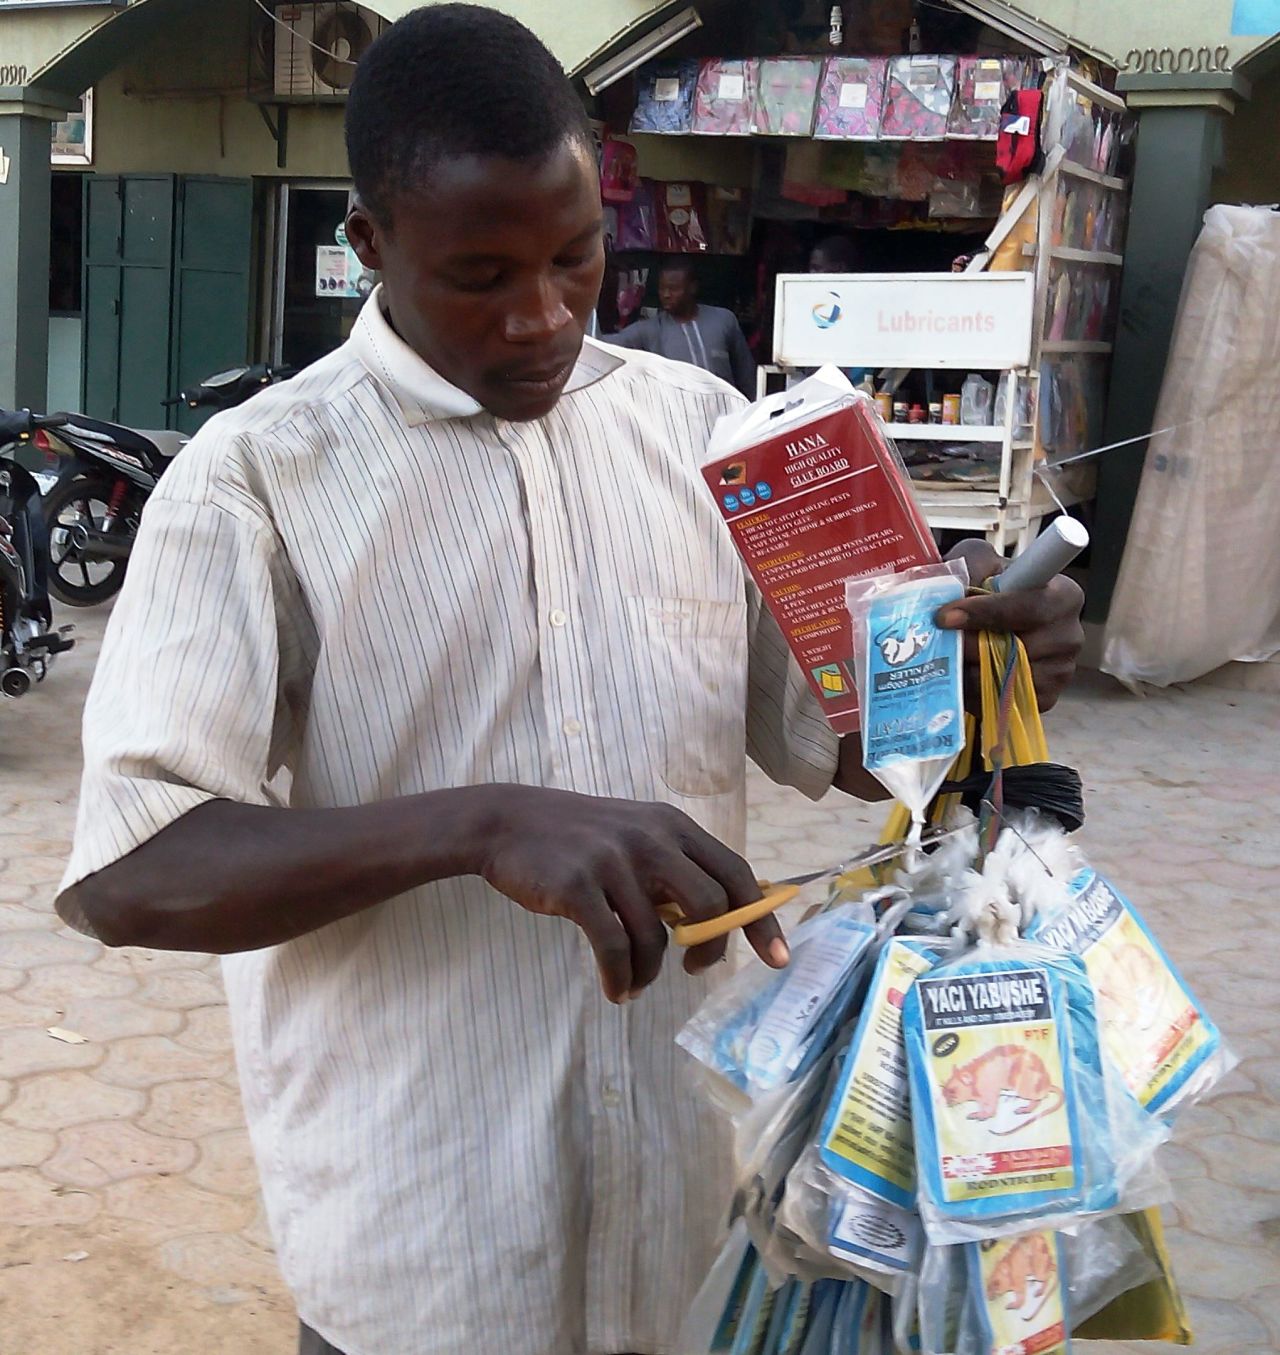 Sales of rat poison, as a means of preventing infection, have taken off in Nigeria following the outbreak of Lassa fever. Pictured, a vendor sells bags of rat poison in northern Nigeria's largest city of Kano.